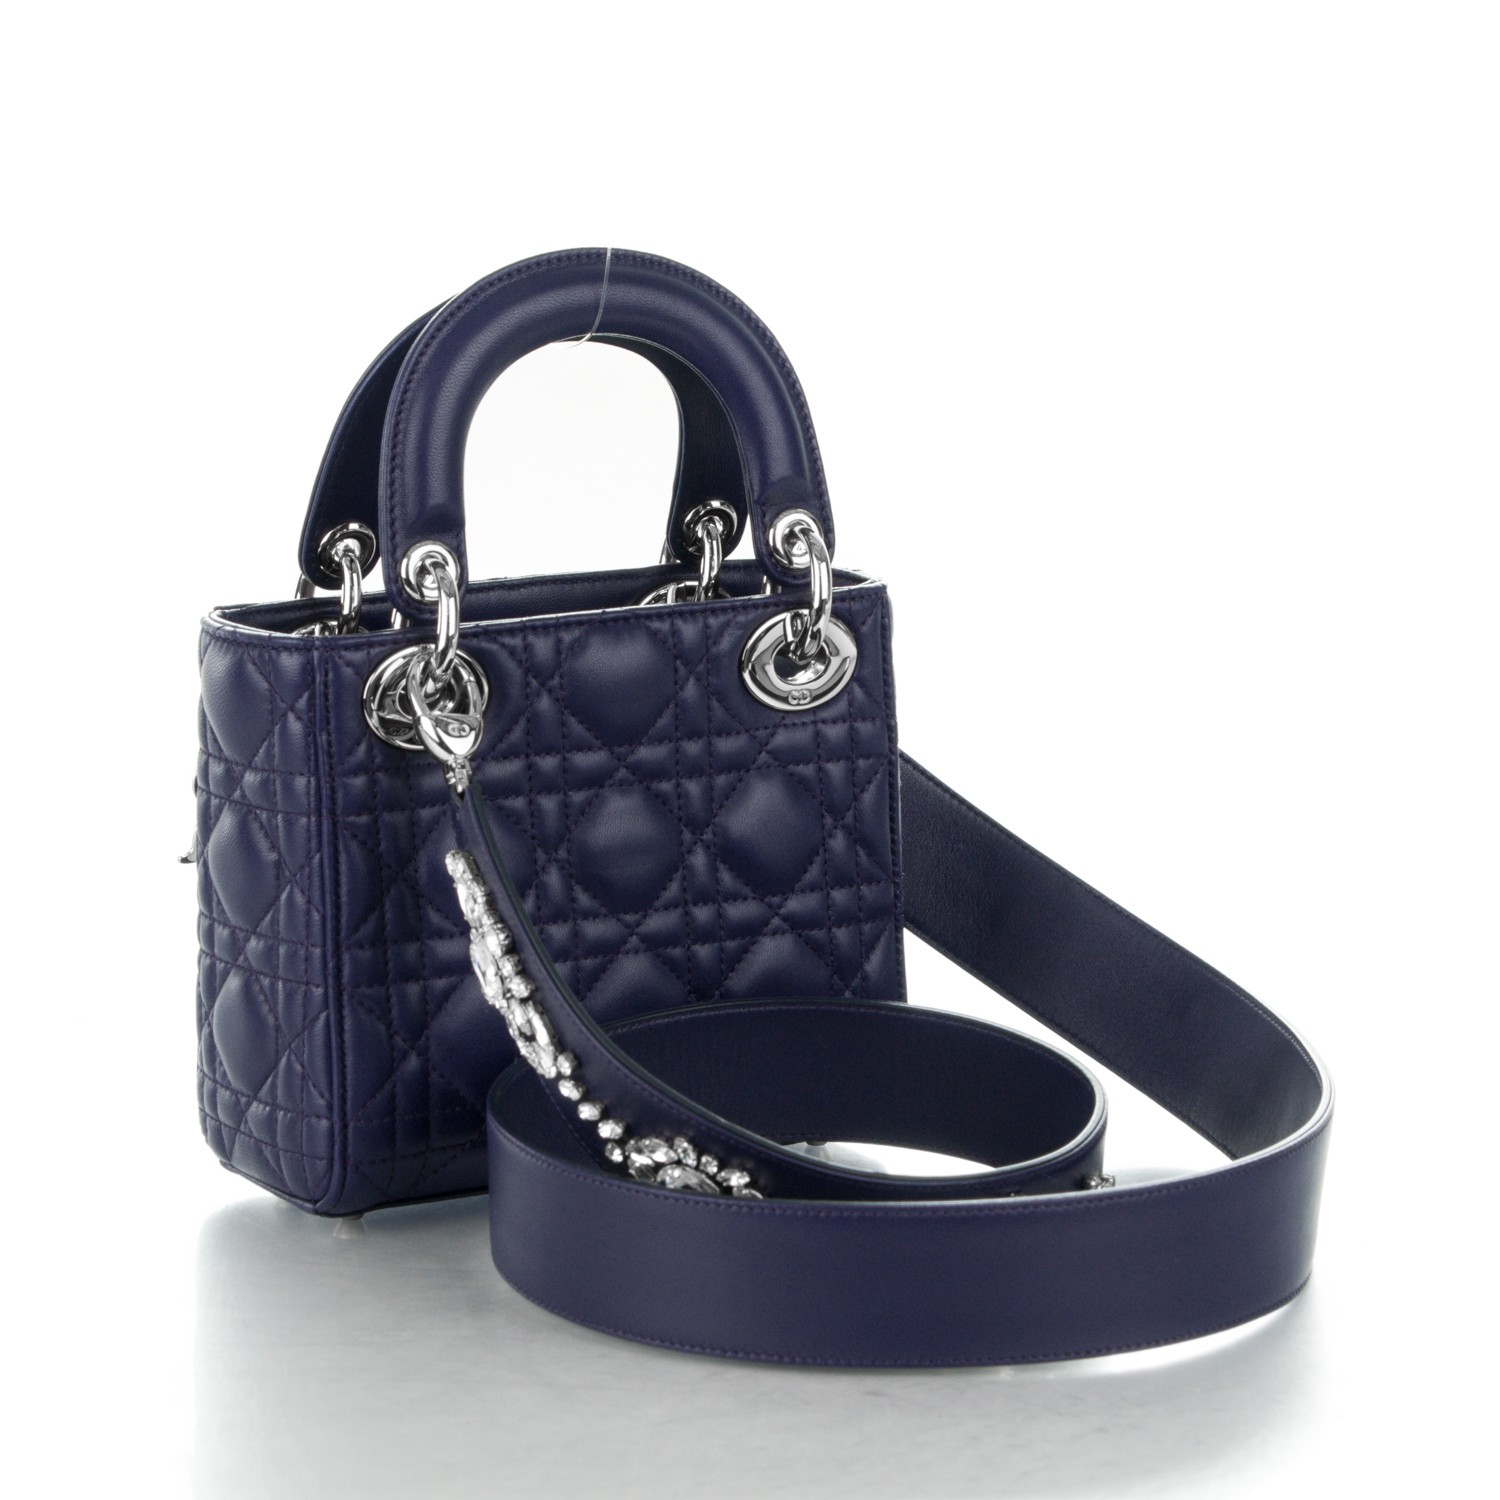 navy lady dior, OFF 76%,Cheap price!